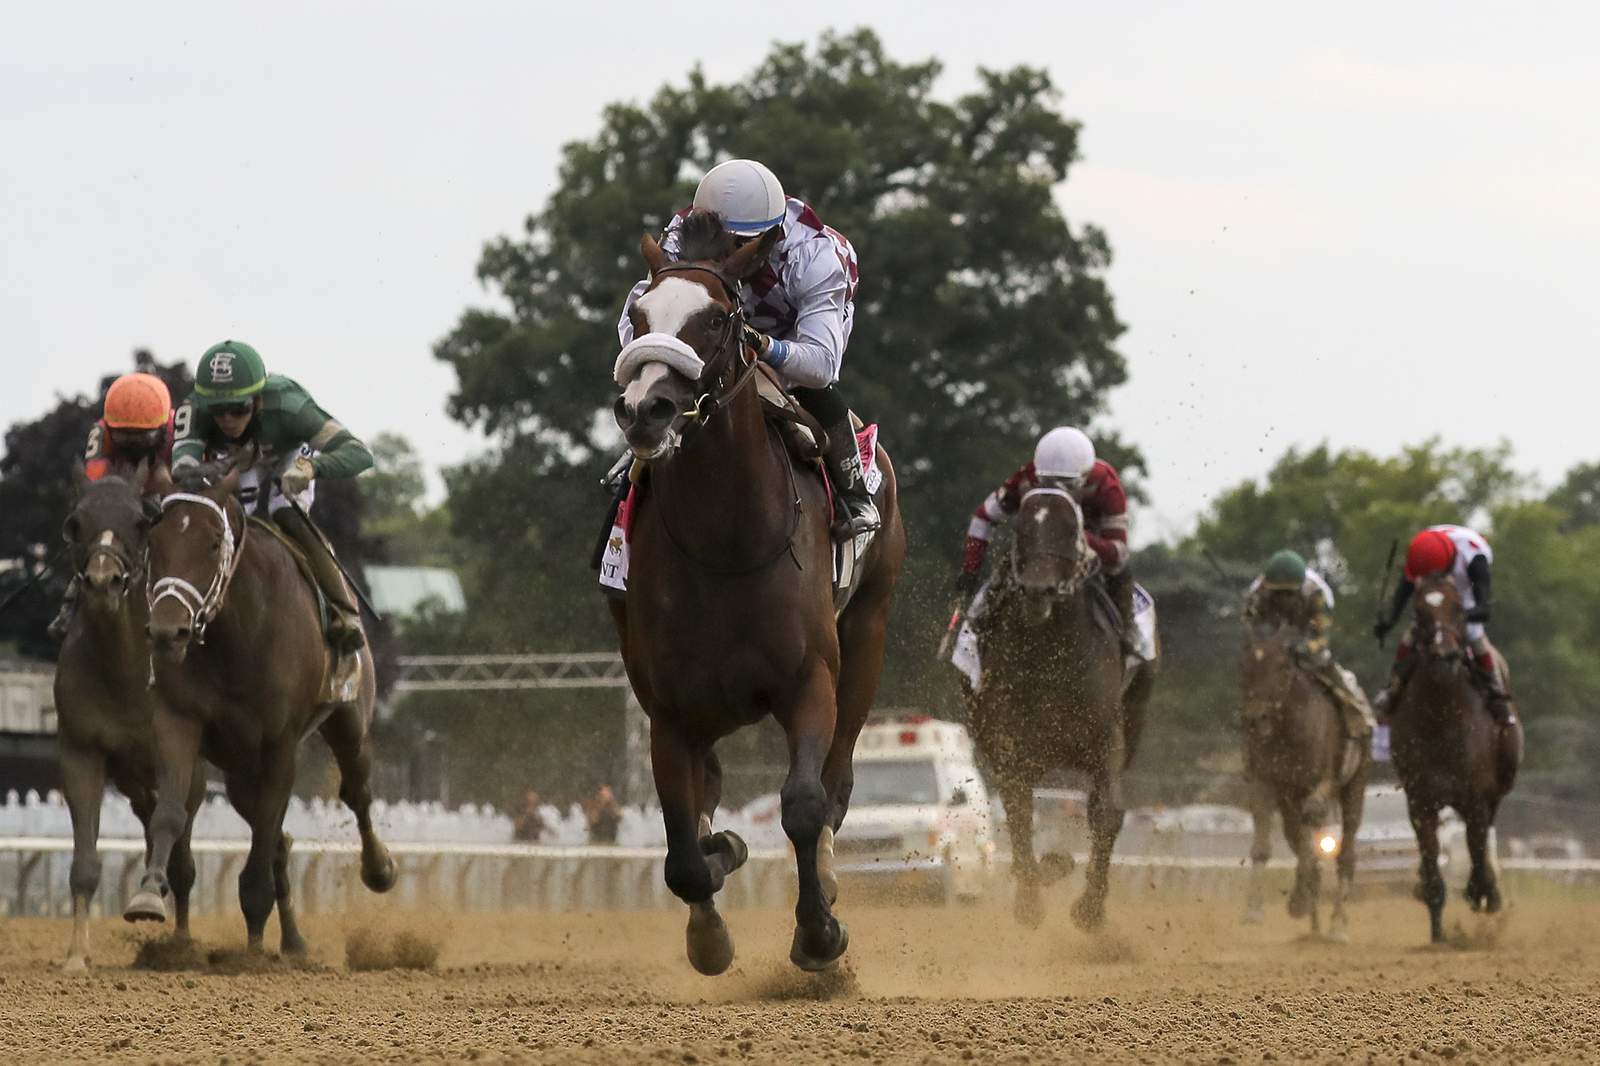 Triple Crown produces 3 different winners, likely no closure